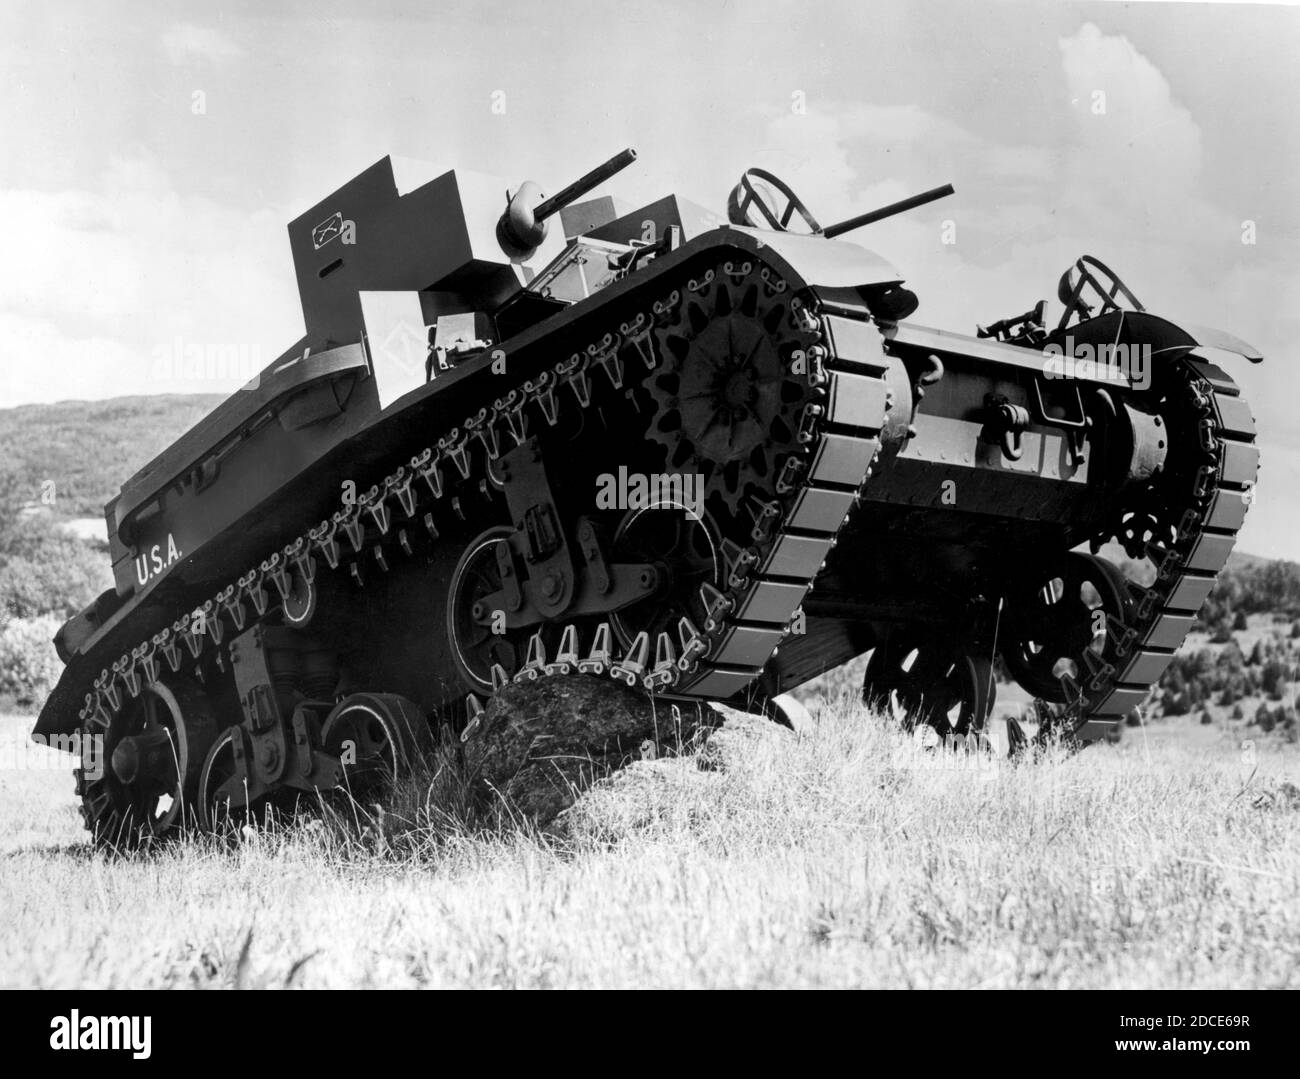 WW II - This is  'Light Tank, M2' being tested, about 1940. On the side of the turret is a pair of white, crossed swords, which designates that this tank belongs to the US Cavalry. These light tanks were produced in the United States before, and during the early years of, WW II. Due to their lighter weight and firepower, they were used in limited ways around the world during the war. They were generally armed with one 37 mm M5 gun and some .30 cal M1919 Browning machine guns. To see my other WW II-related images, Search:  Prestor  vintage  WW II Stock Photo